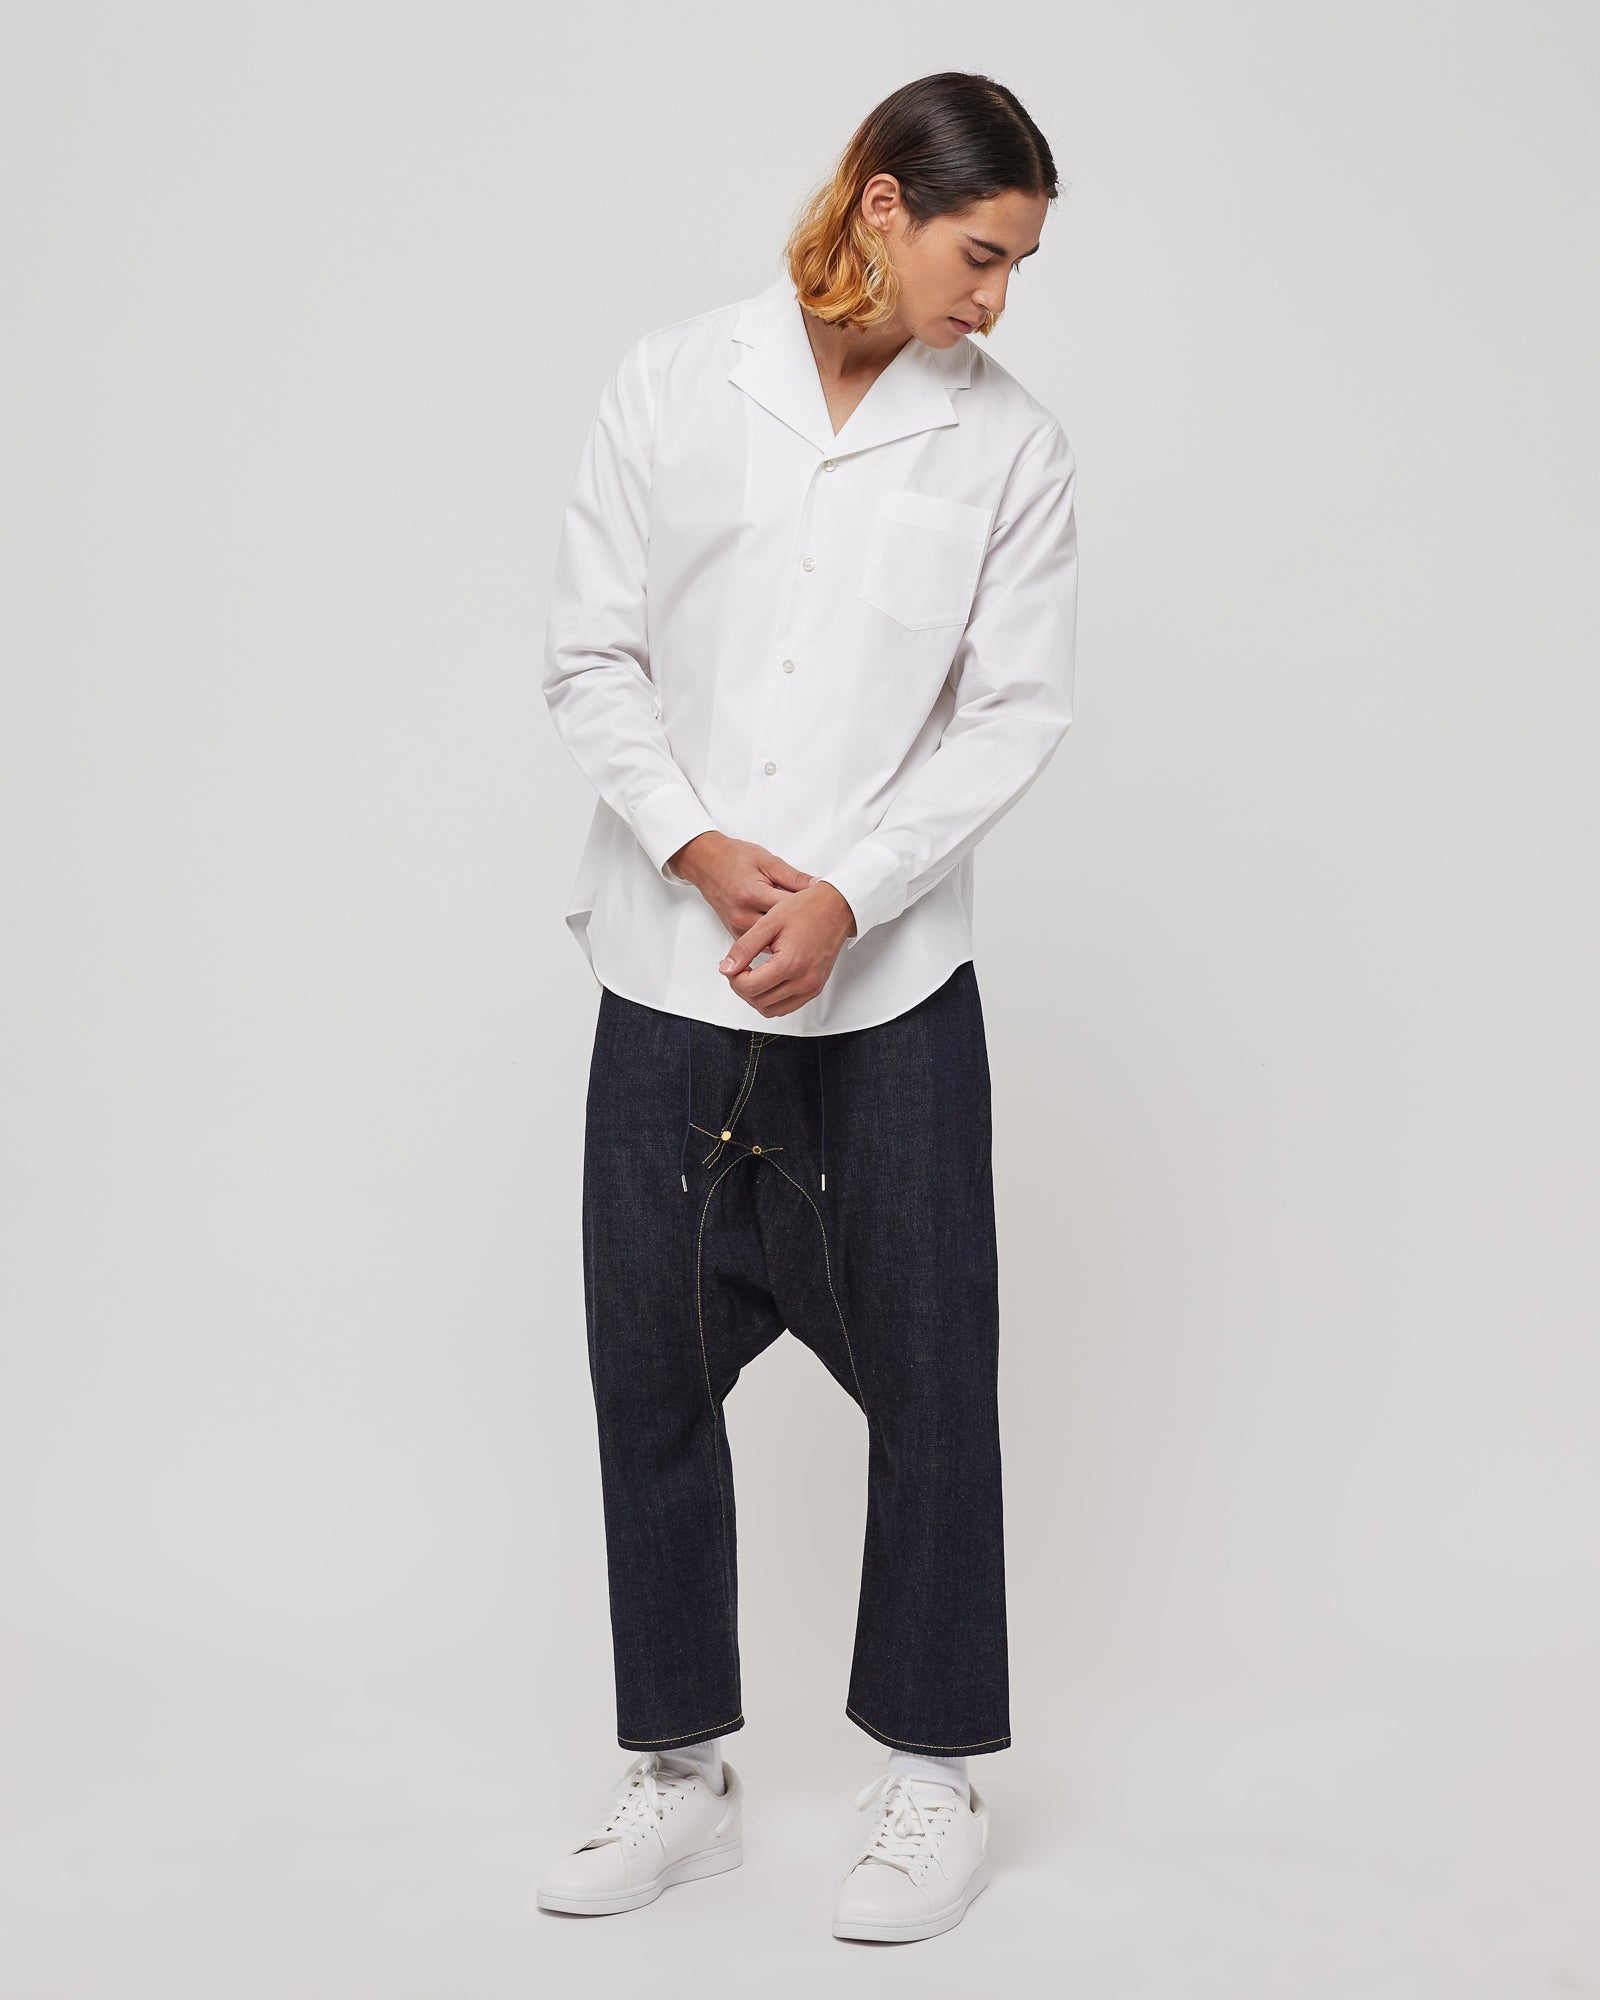 Box Pleat Button Up Shirt in White